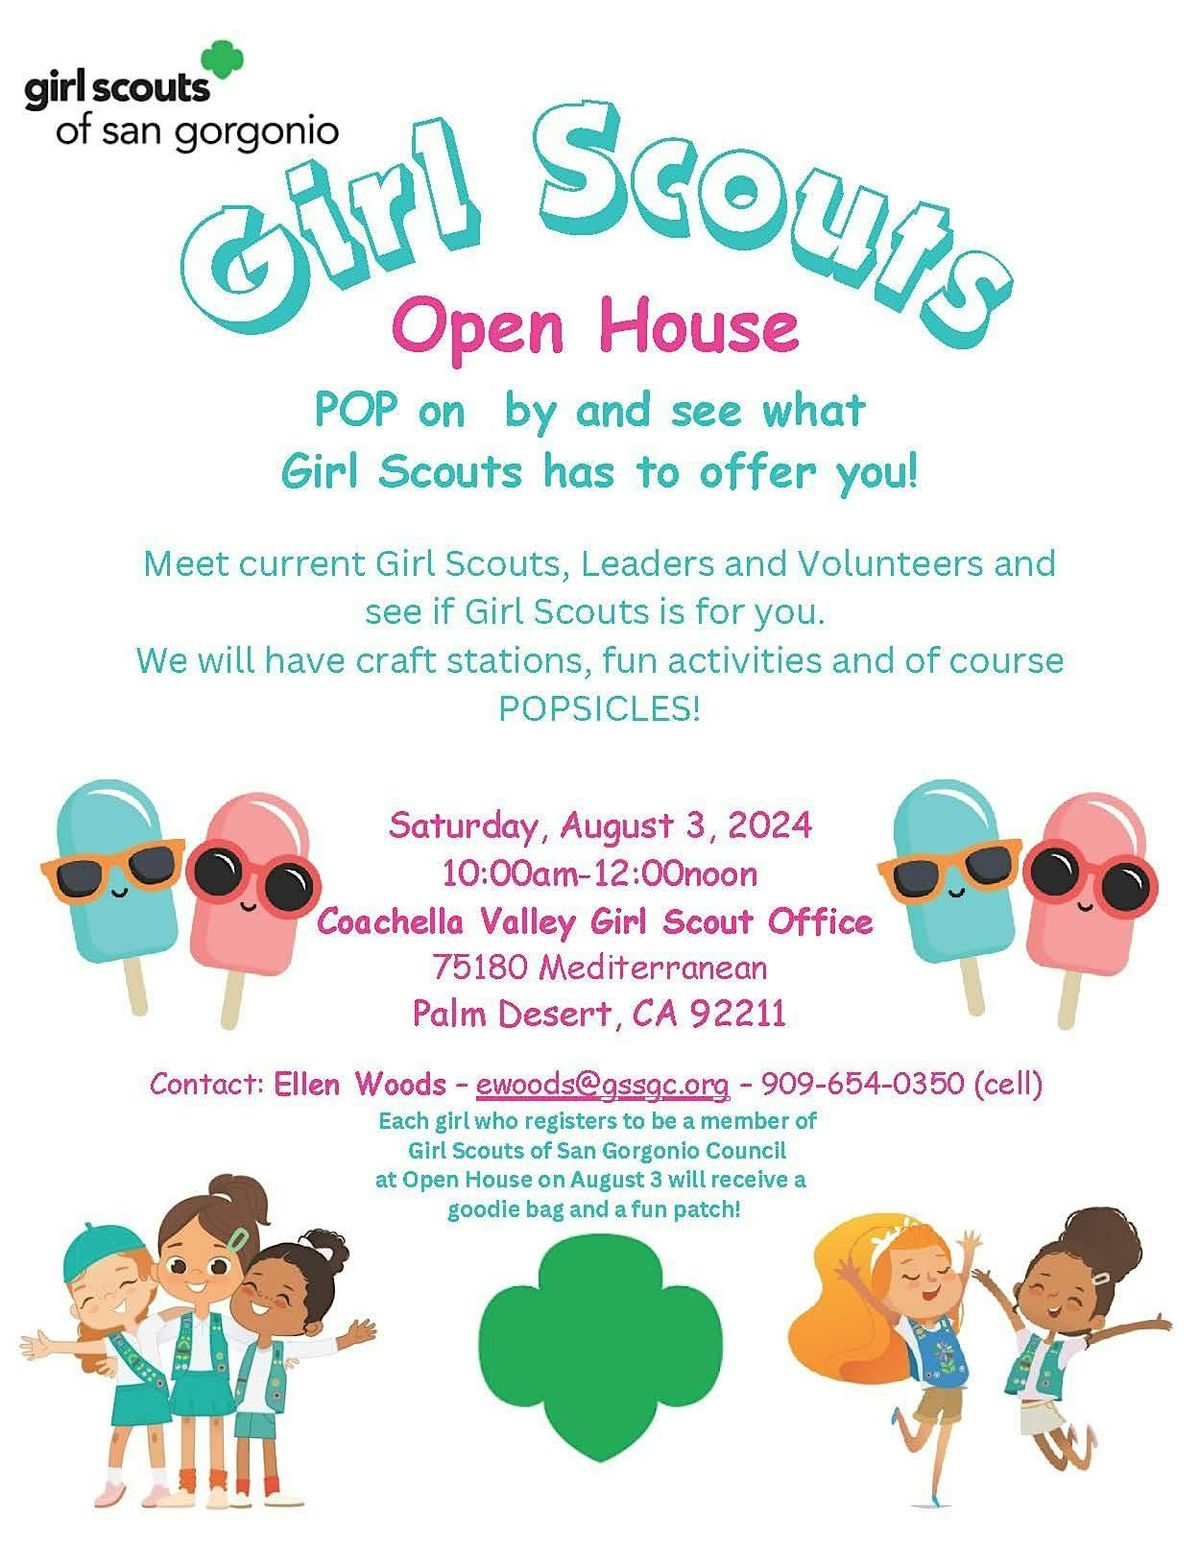 Girl Scouts Open House